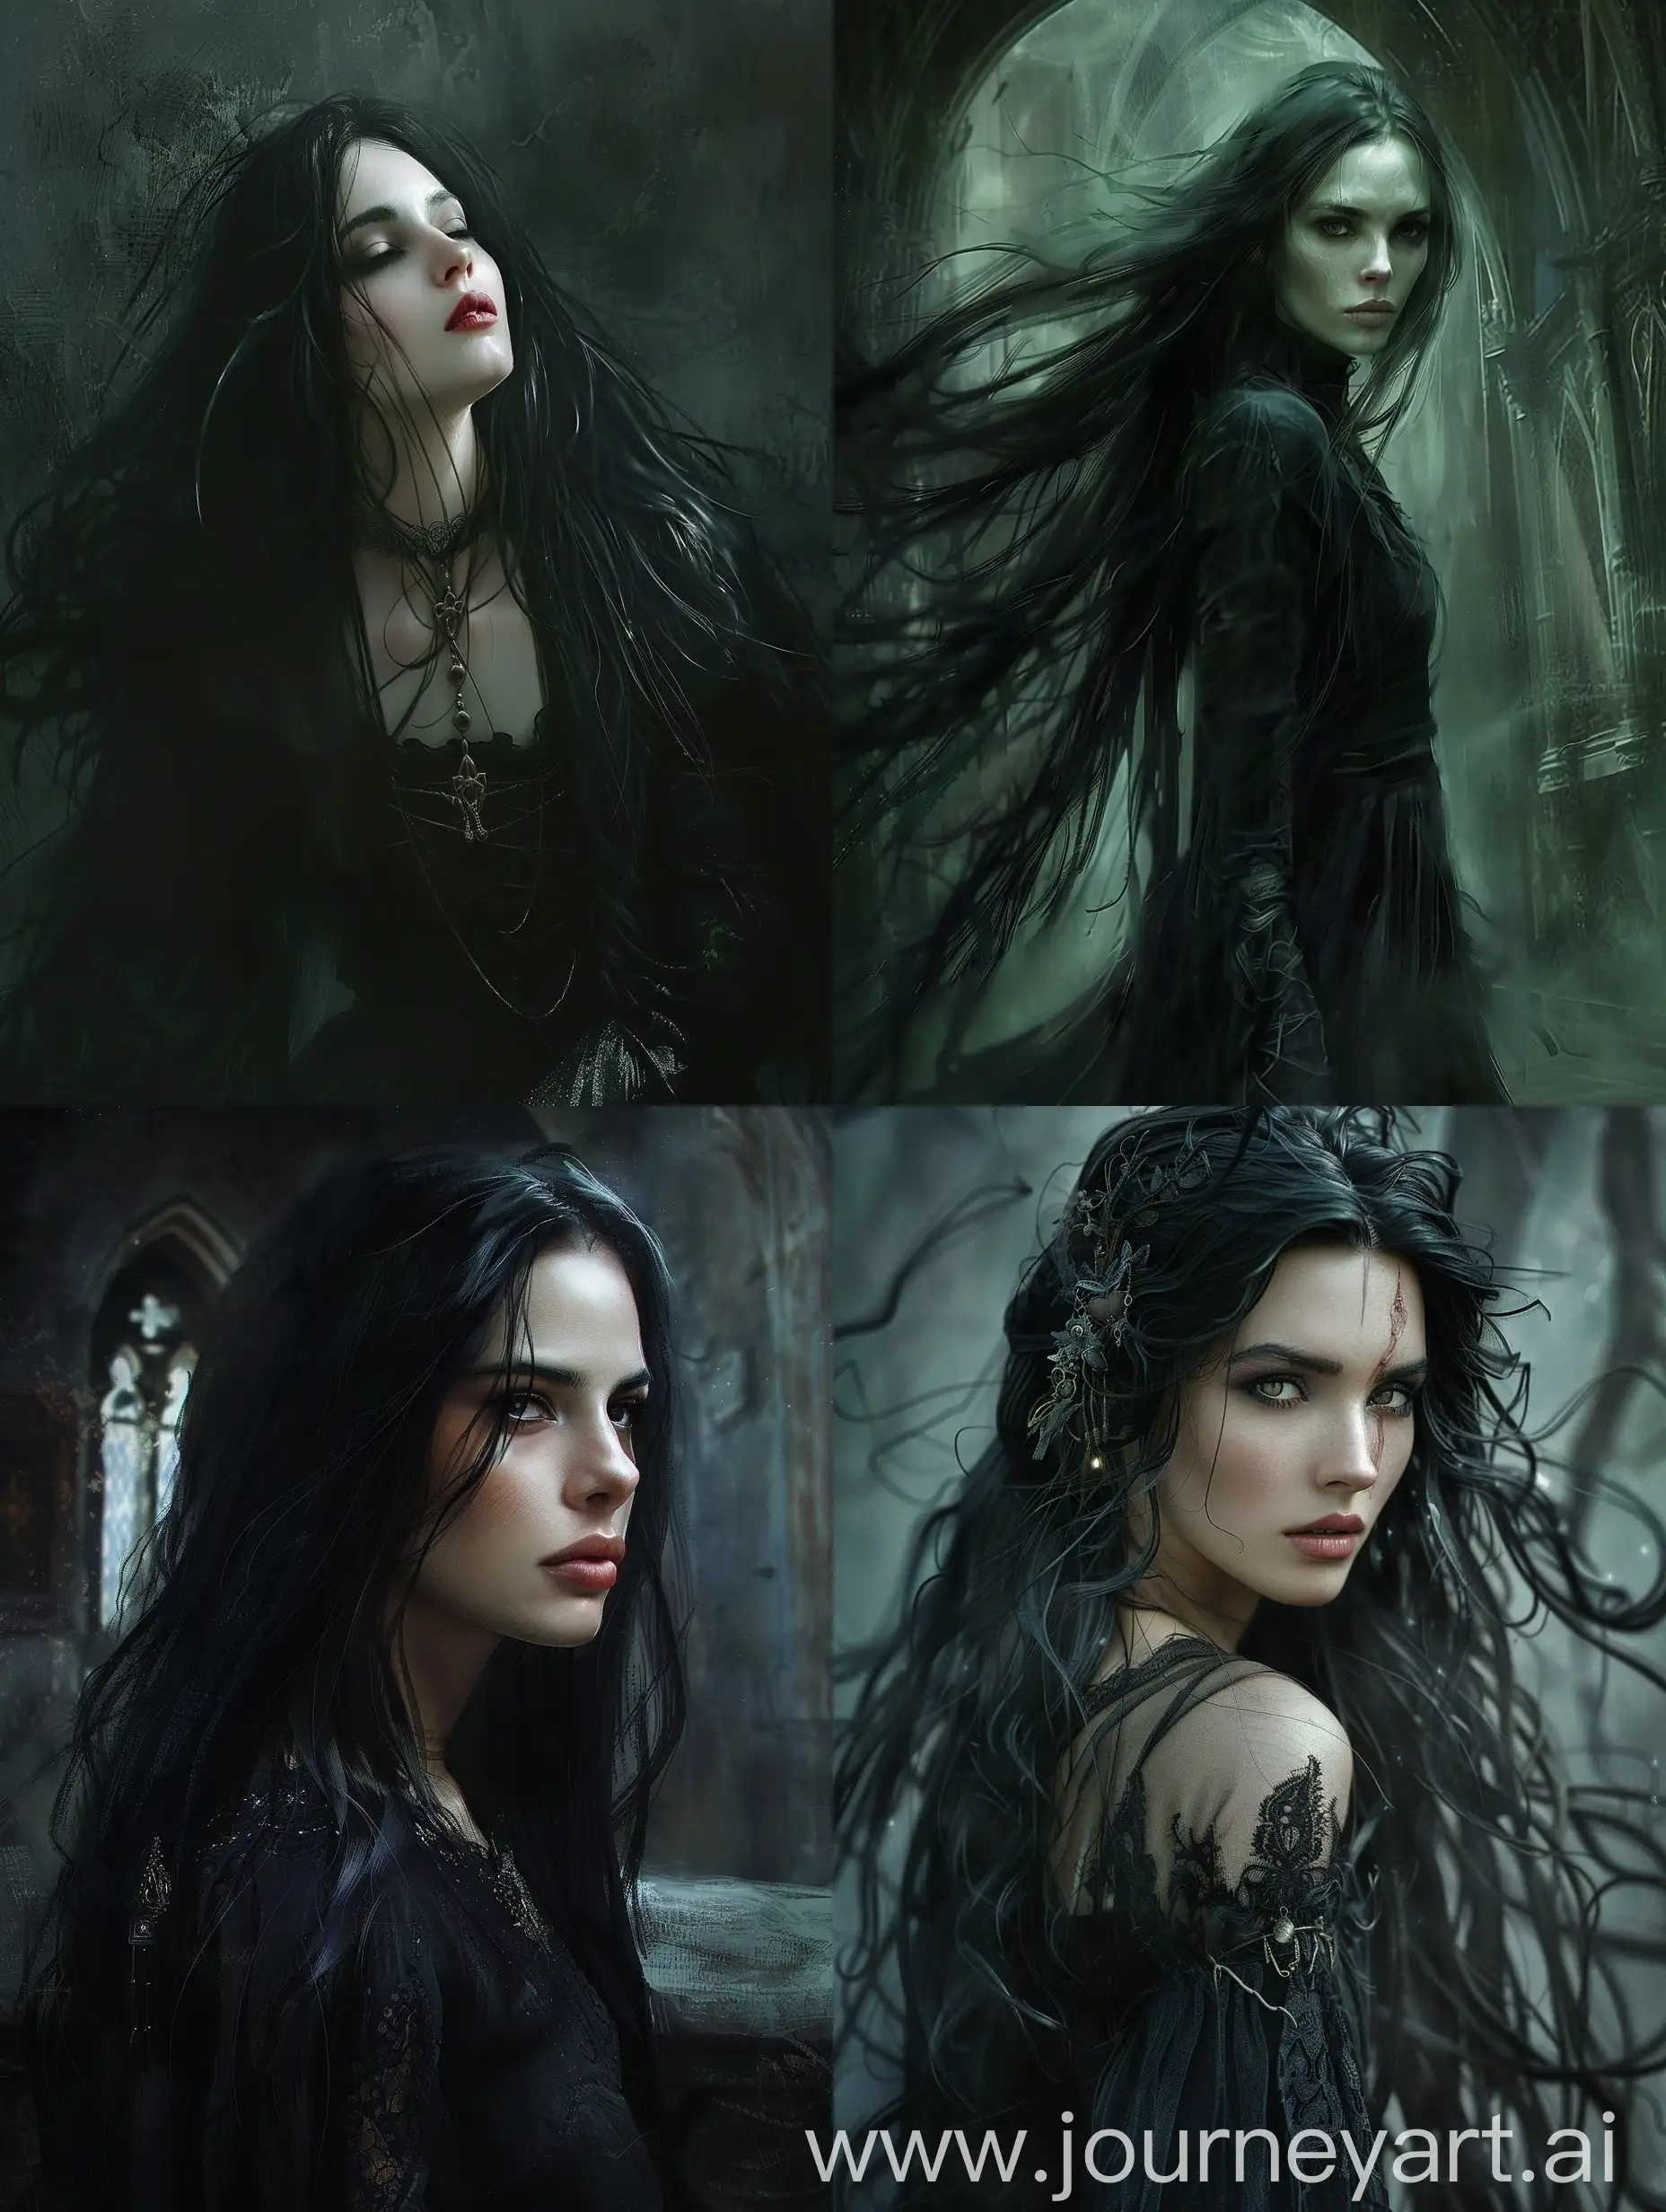 Striking dark surrealistic style, fantasy, horror, dark occult realism

Highly stylized, dramatic lighting , sense of supernatural

A dark wizardess of immense otherworldly power: 

Pale, thin, very beautiful in a dark otherworldly manor, long flowing black hair.

--V6 -- Raw style -- MIDJOURNEY.